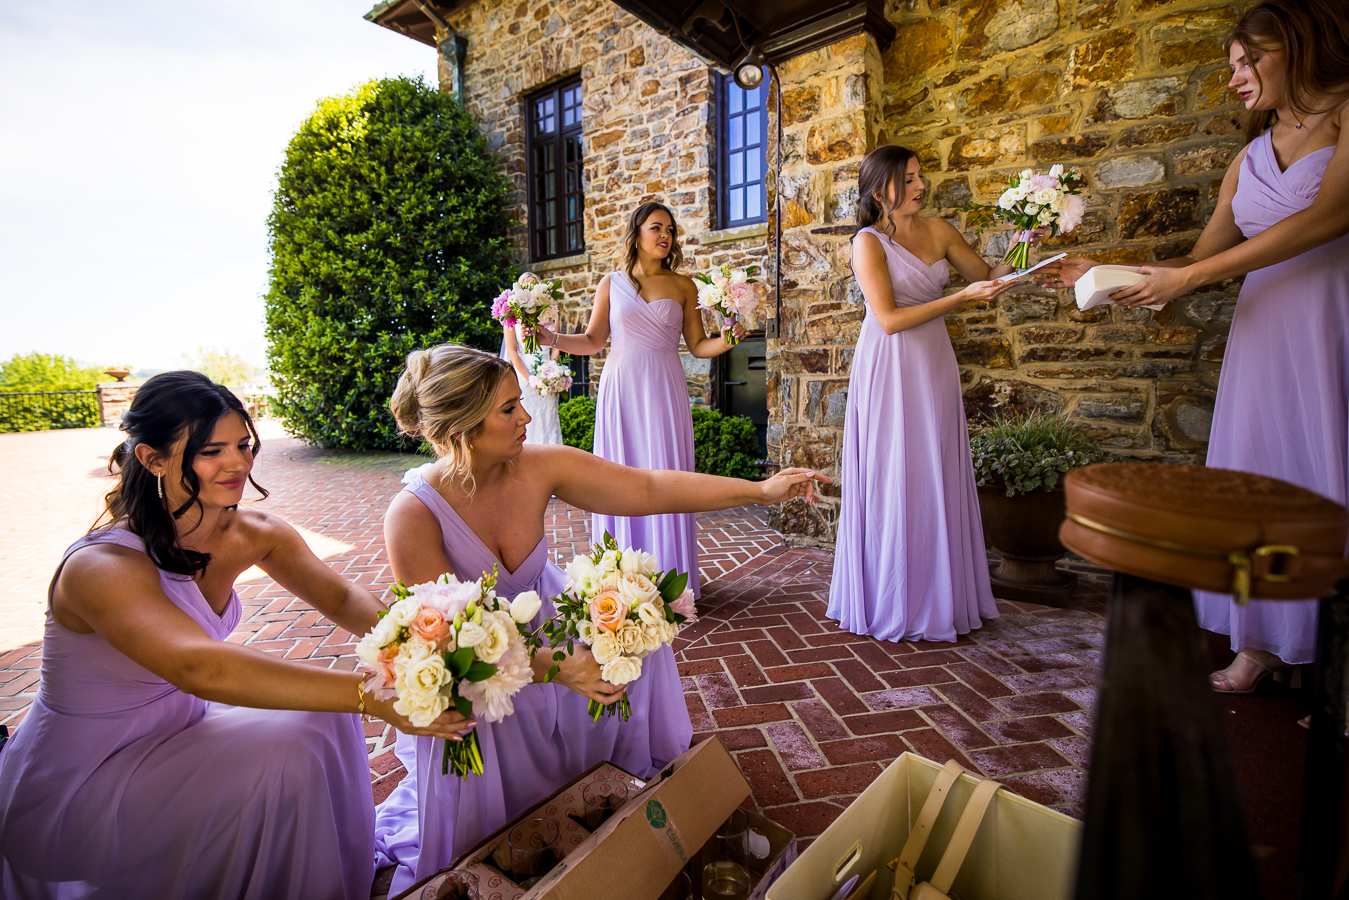 image of the bridesmaids in their lilac colored dress passing flower bouquets around while the bride gets pictures taken in the background behind them before the wedding ceremony 